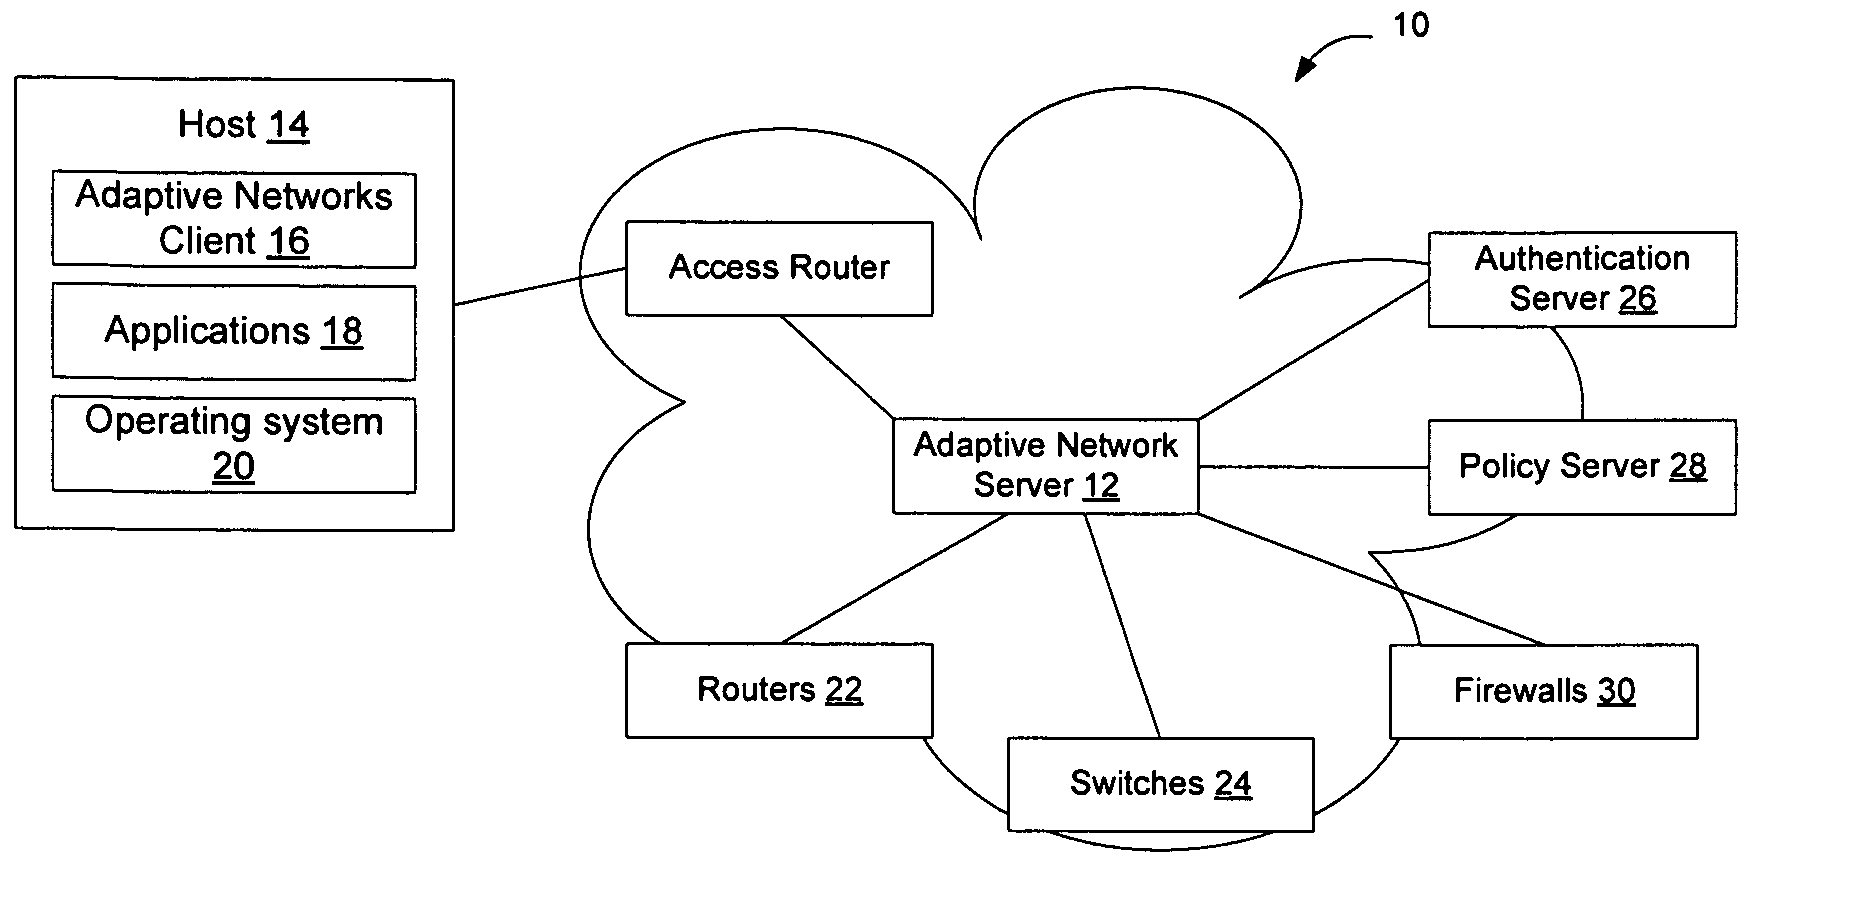 Method and apparatus for adapting a communication network according to information provided by a trusted client